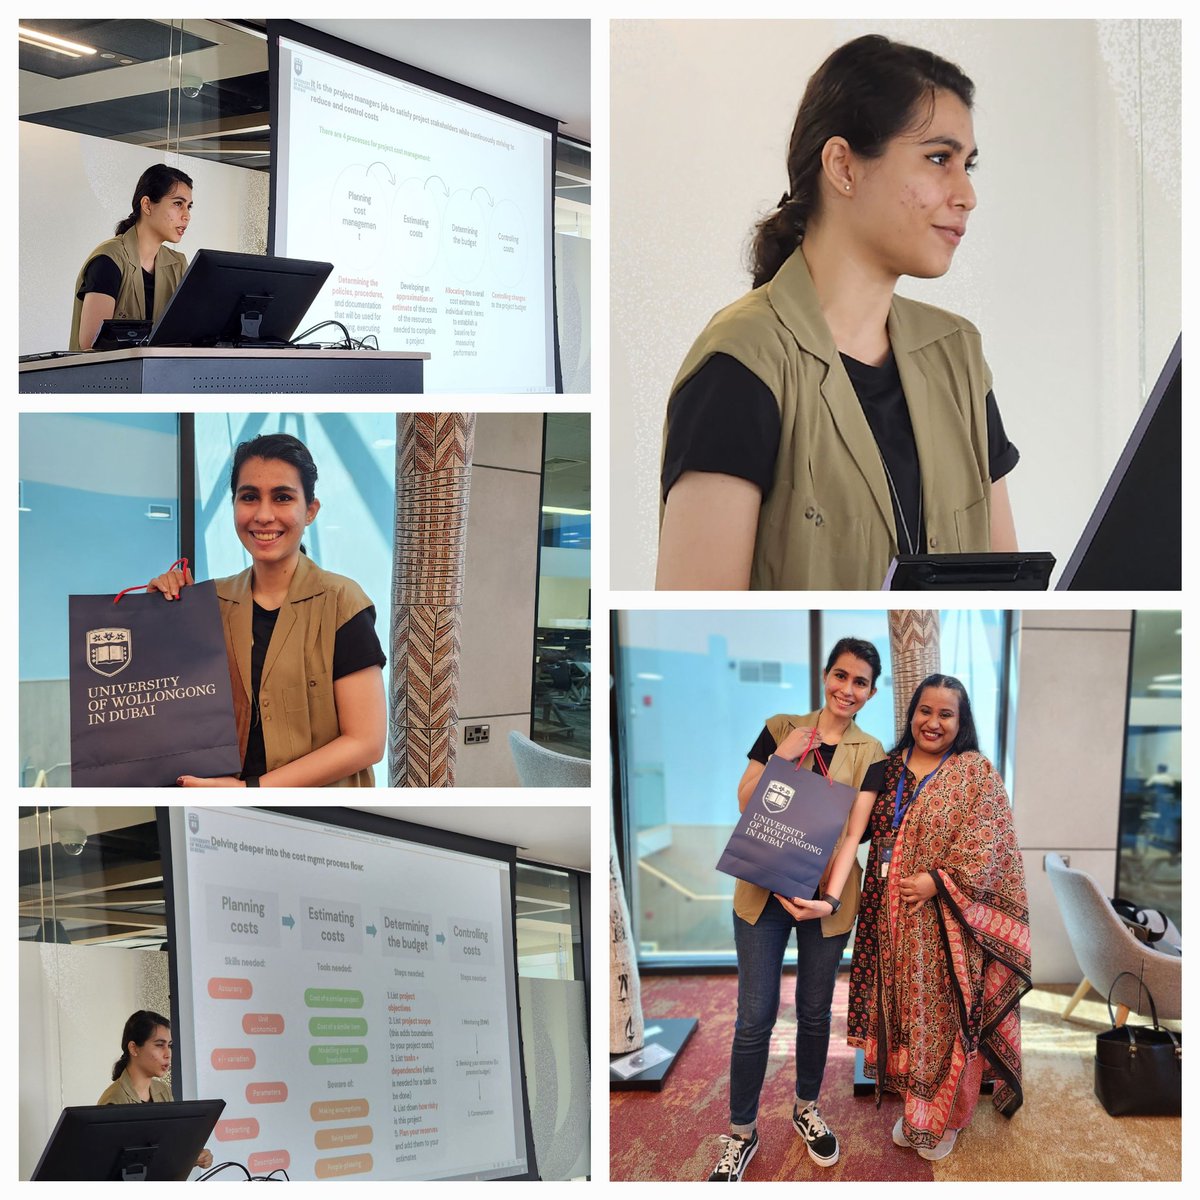 What a great way to start Monday! 

Had the pleasure to welcome our @UOWD alumna Sanjana Raheja who is an all-star graduate who went from graduating with an accounting degree to learning to code to now being a senior project manager, to talk cost management.

#teachingispassion